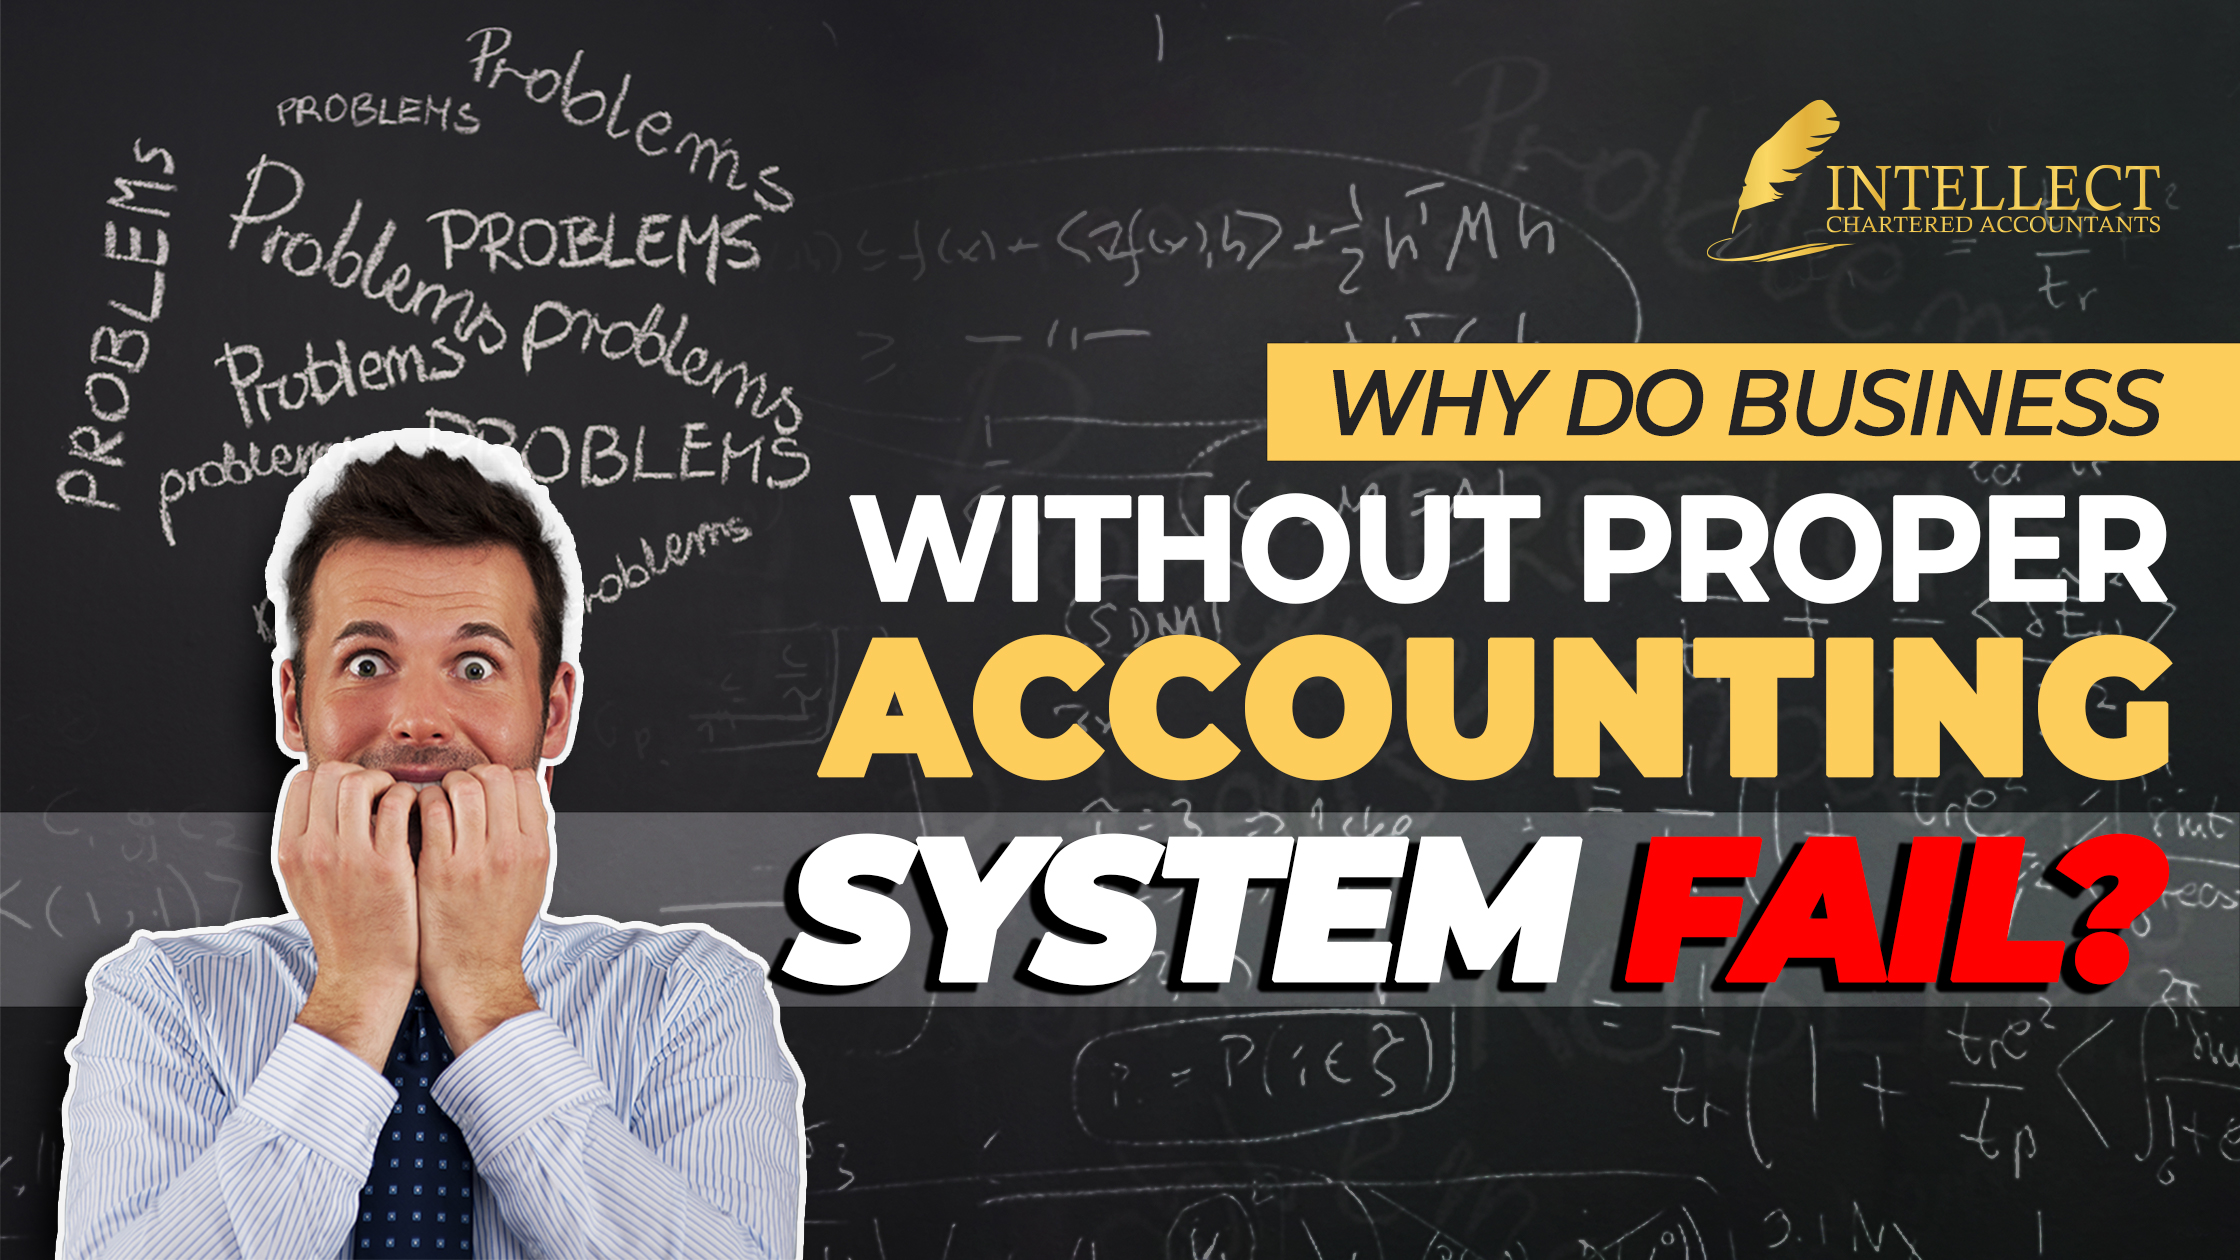 Why Do Business Without Proper Accounting System Fail?